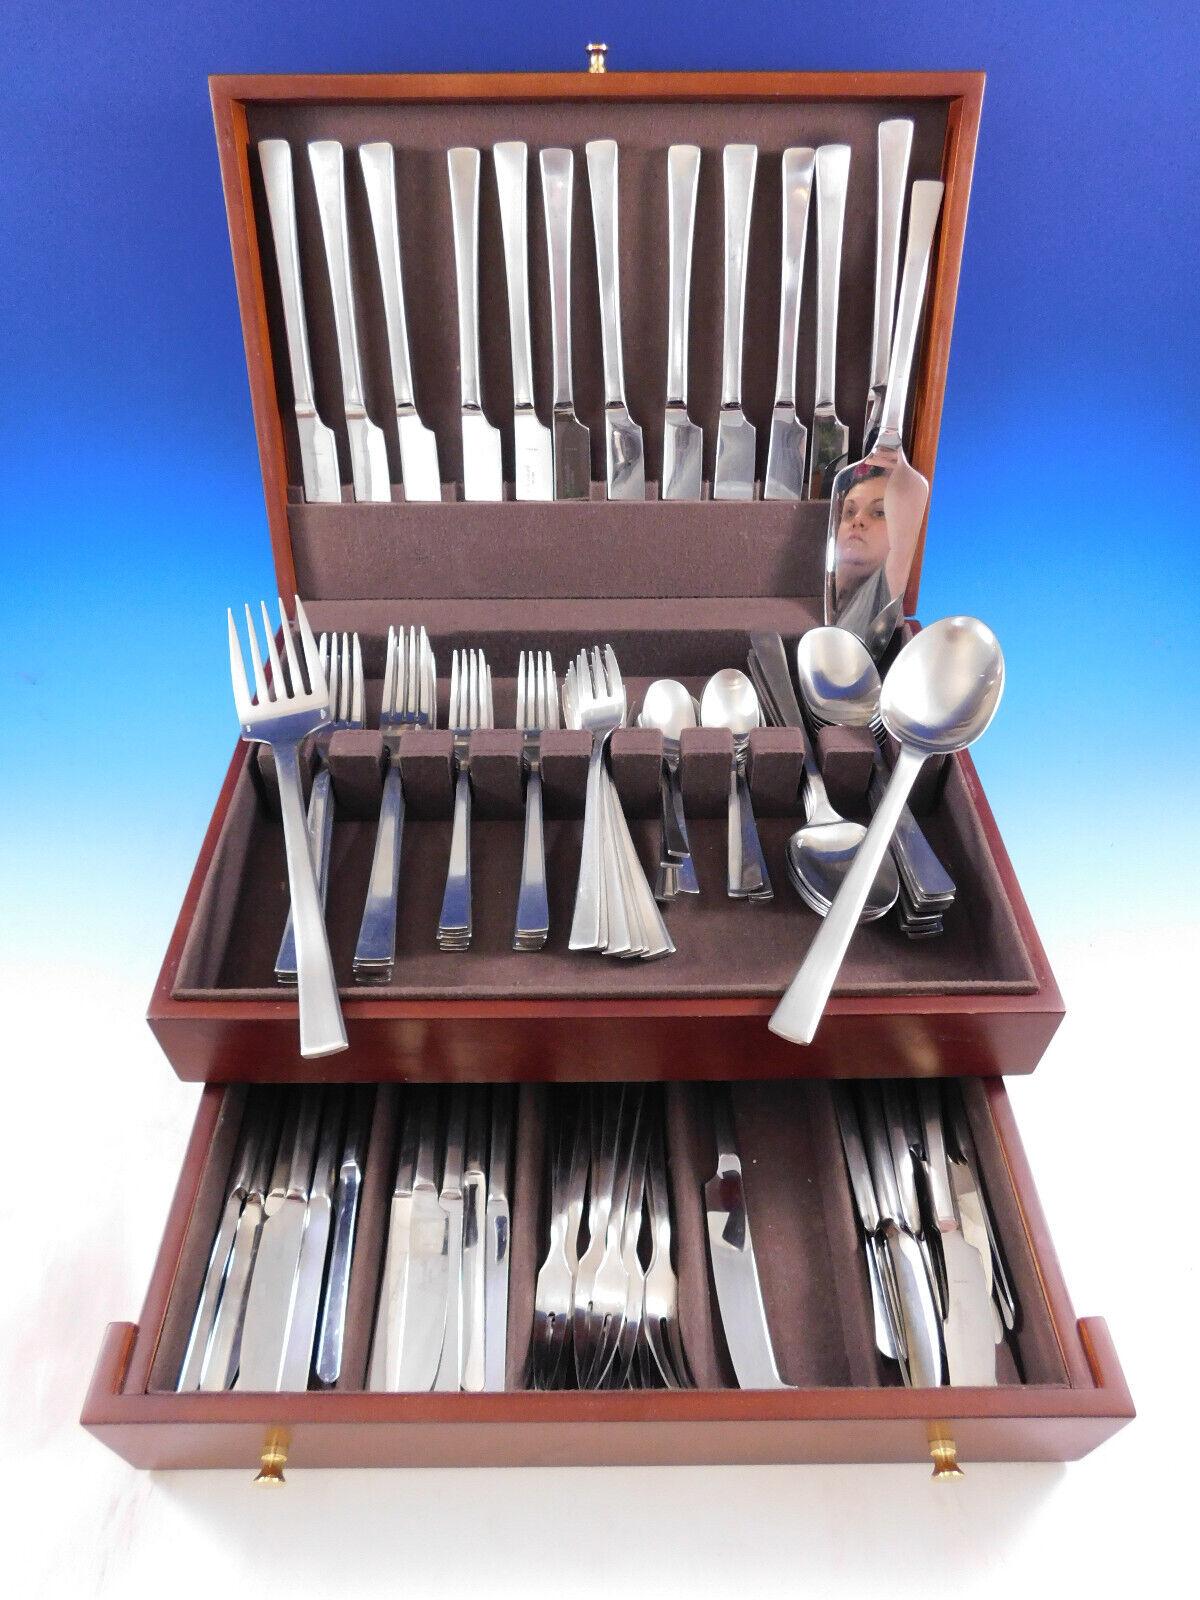 Delta by Christofle Acier France stainless steel flatware set with beautiful simple, modern design - 112 pieces. This set includes:

12 dinner size knives, 9 3/8